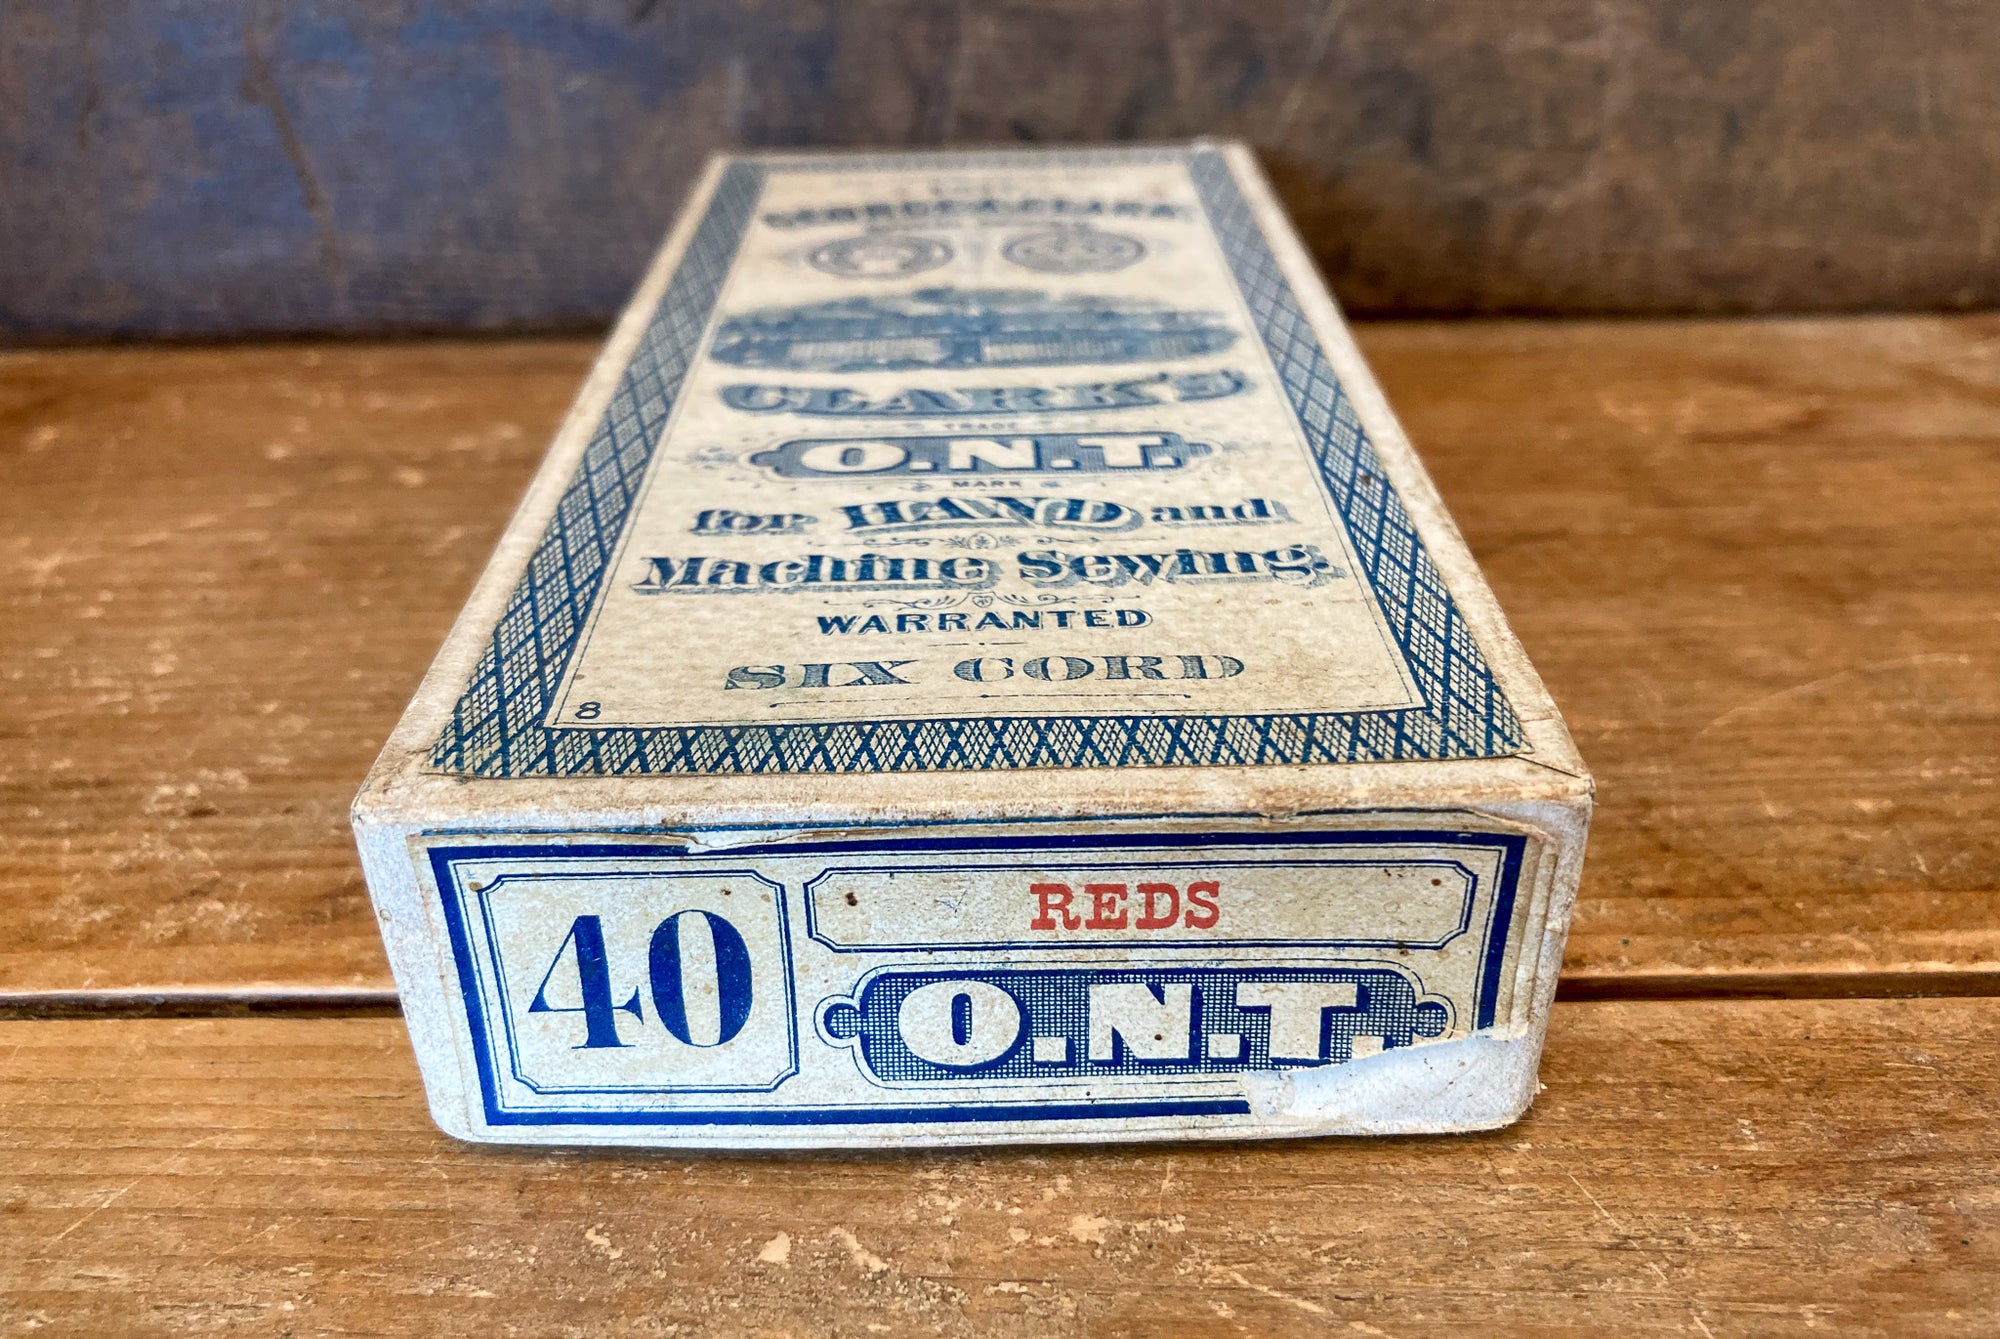 Full of New Old Thread! Clark’s O.N.T. Six Cord Reds, New in Original Box